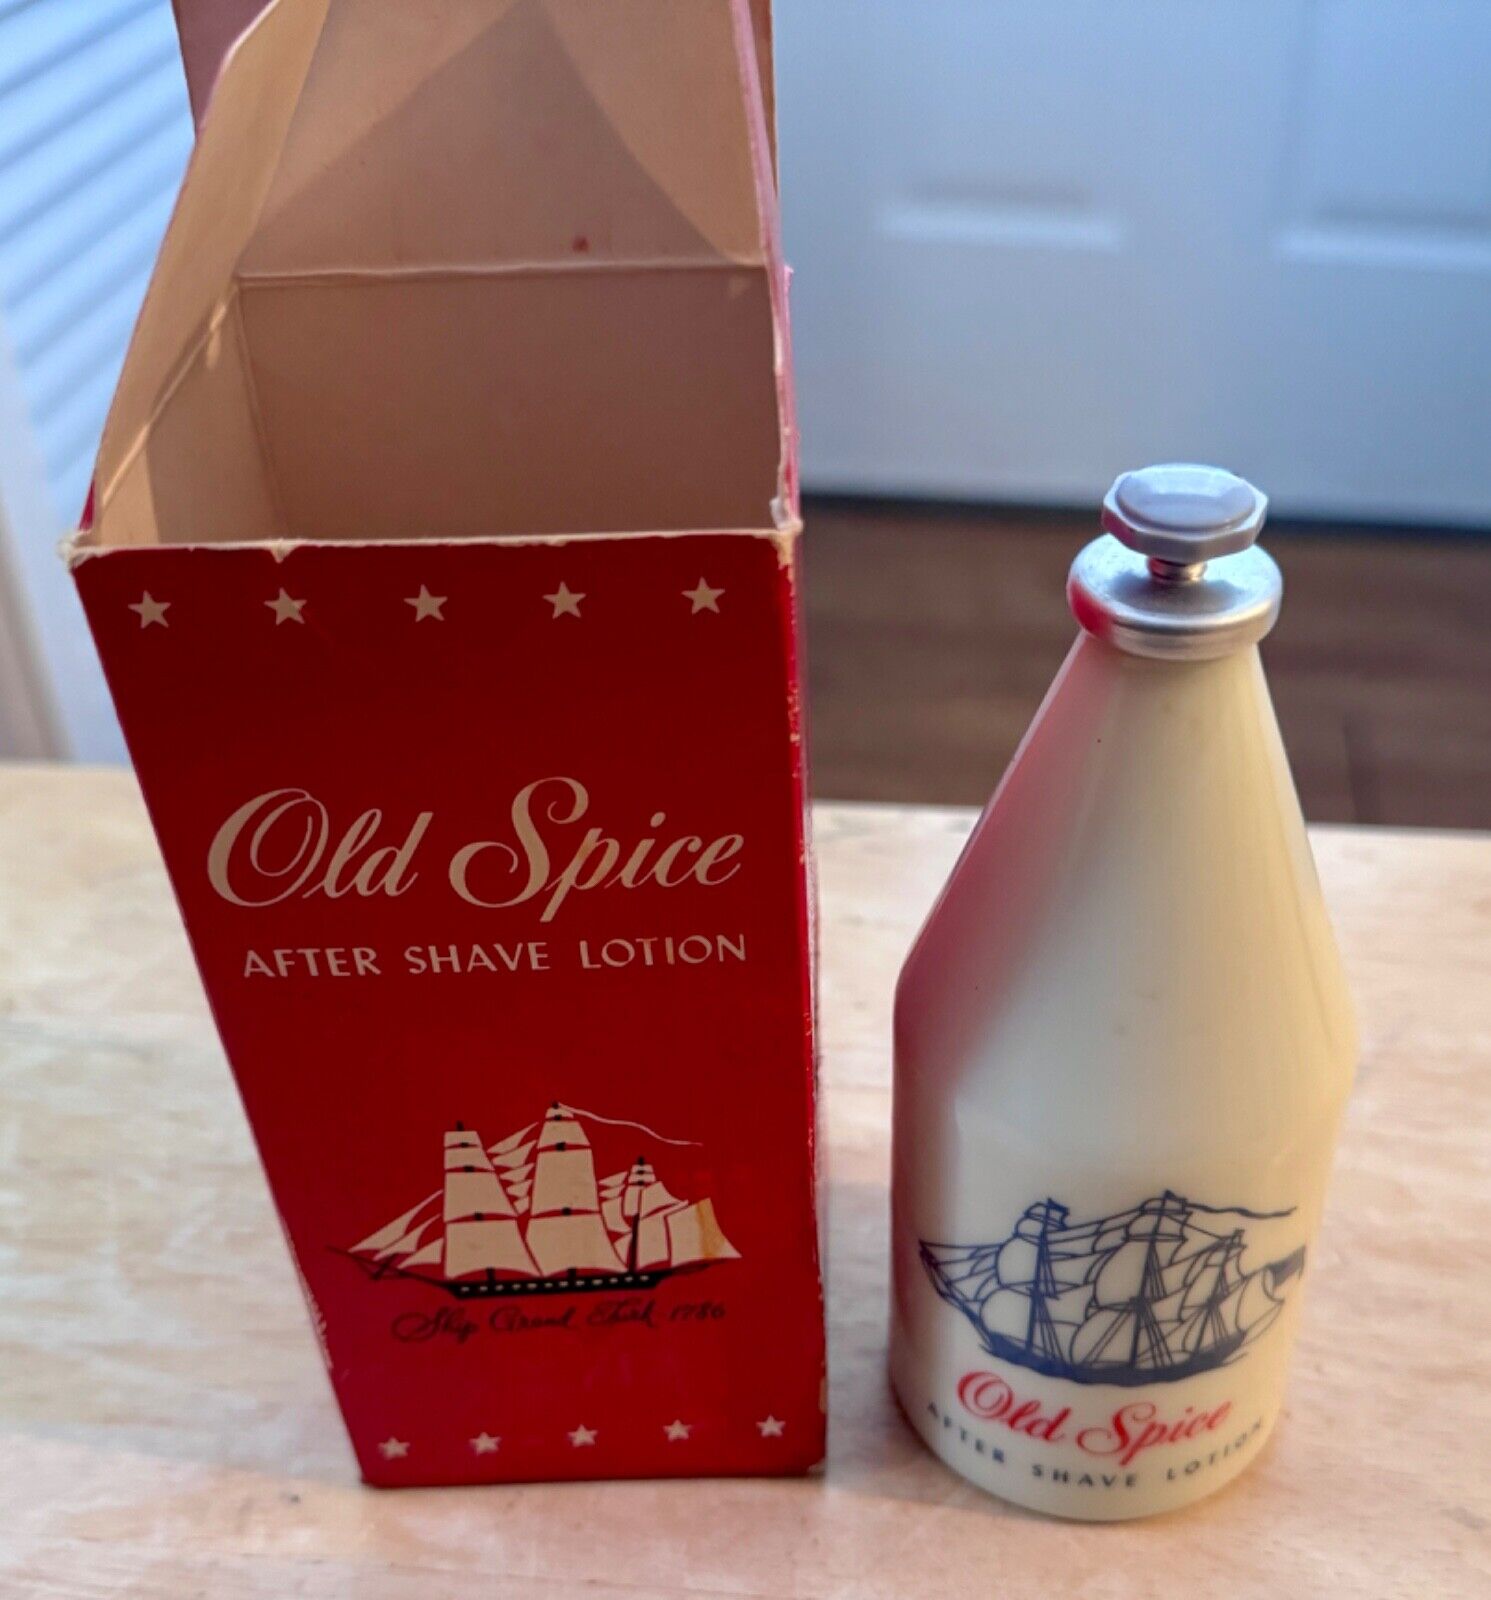 NEW Vintage OLD SPICE After Shave Lotion SHULTON 4 3/4 oz. RARE #3710